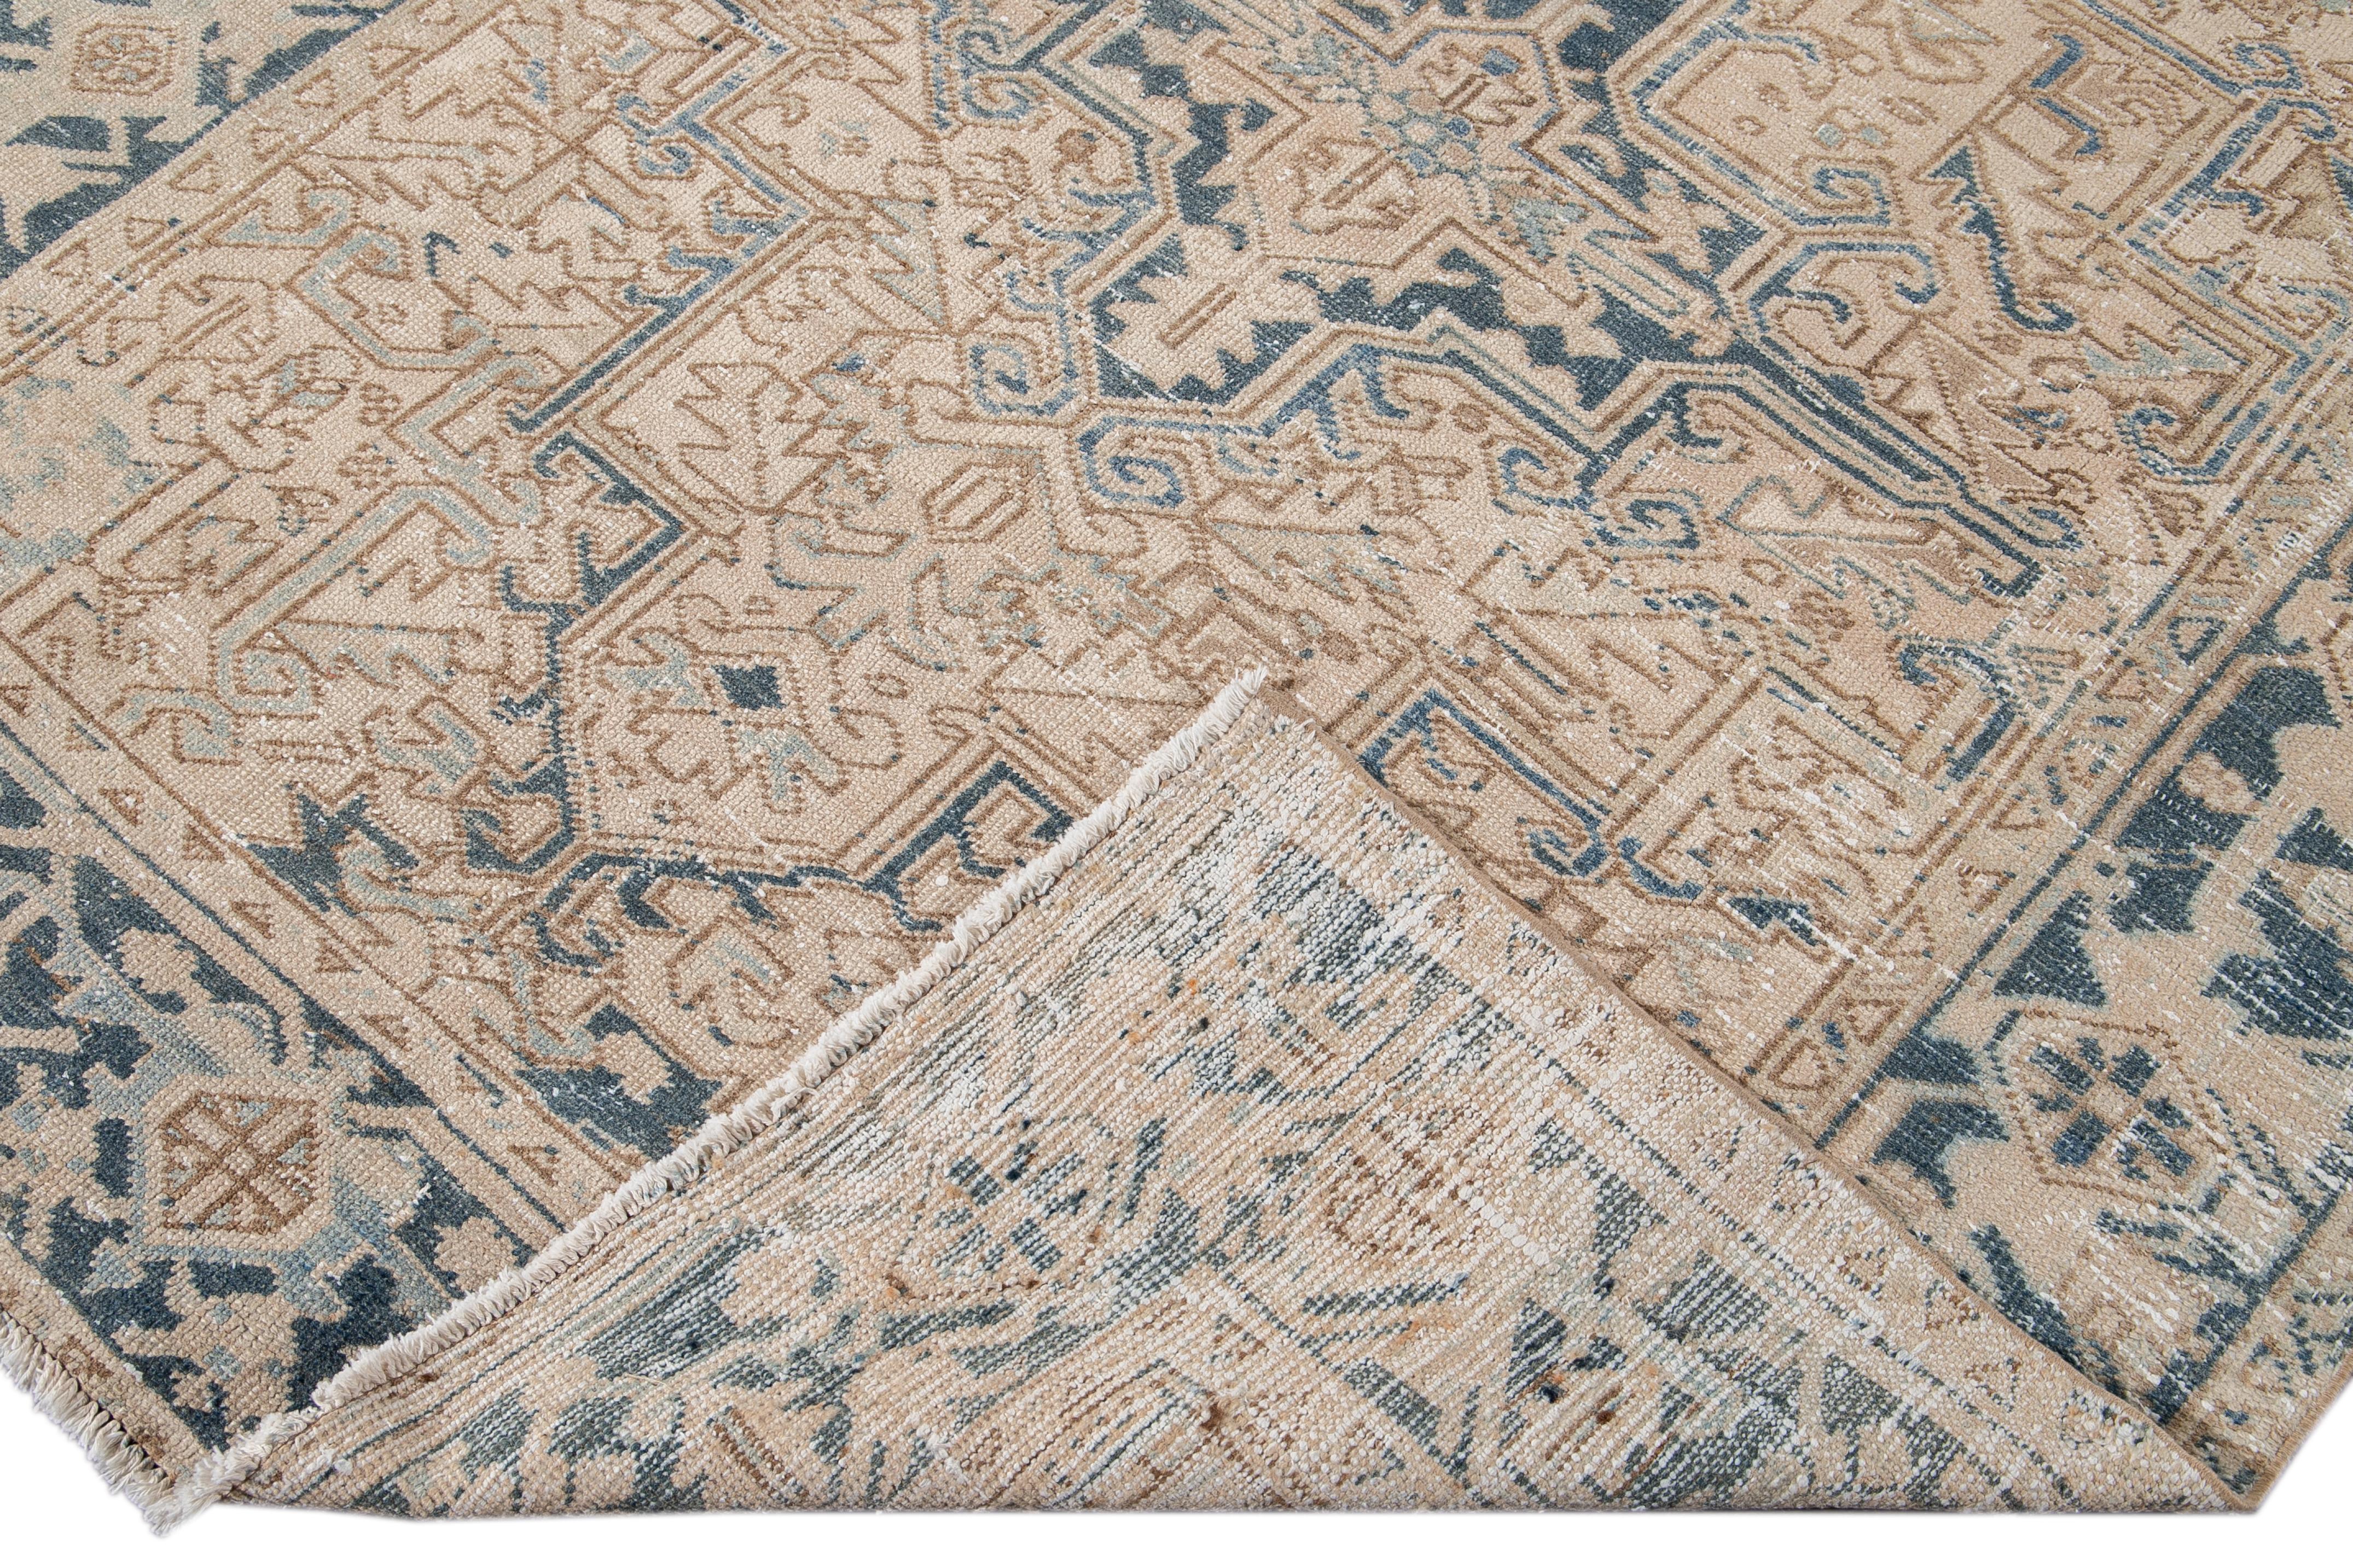 Beautiful antique Persian Heriz hand-knotted wool rug with a beige field. This Heriz rug has a blue frame and accents in an all-over gorgeous geometric floral shabby chic design.

This rug measures: 6'3